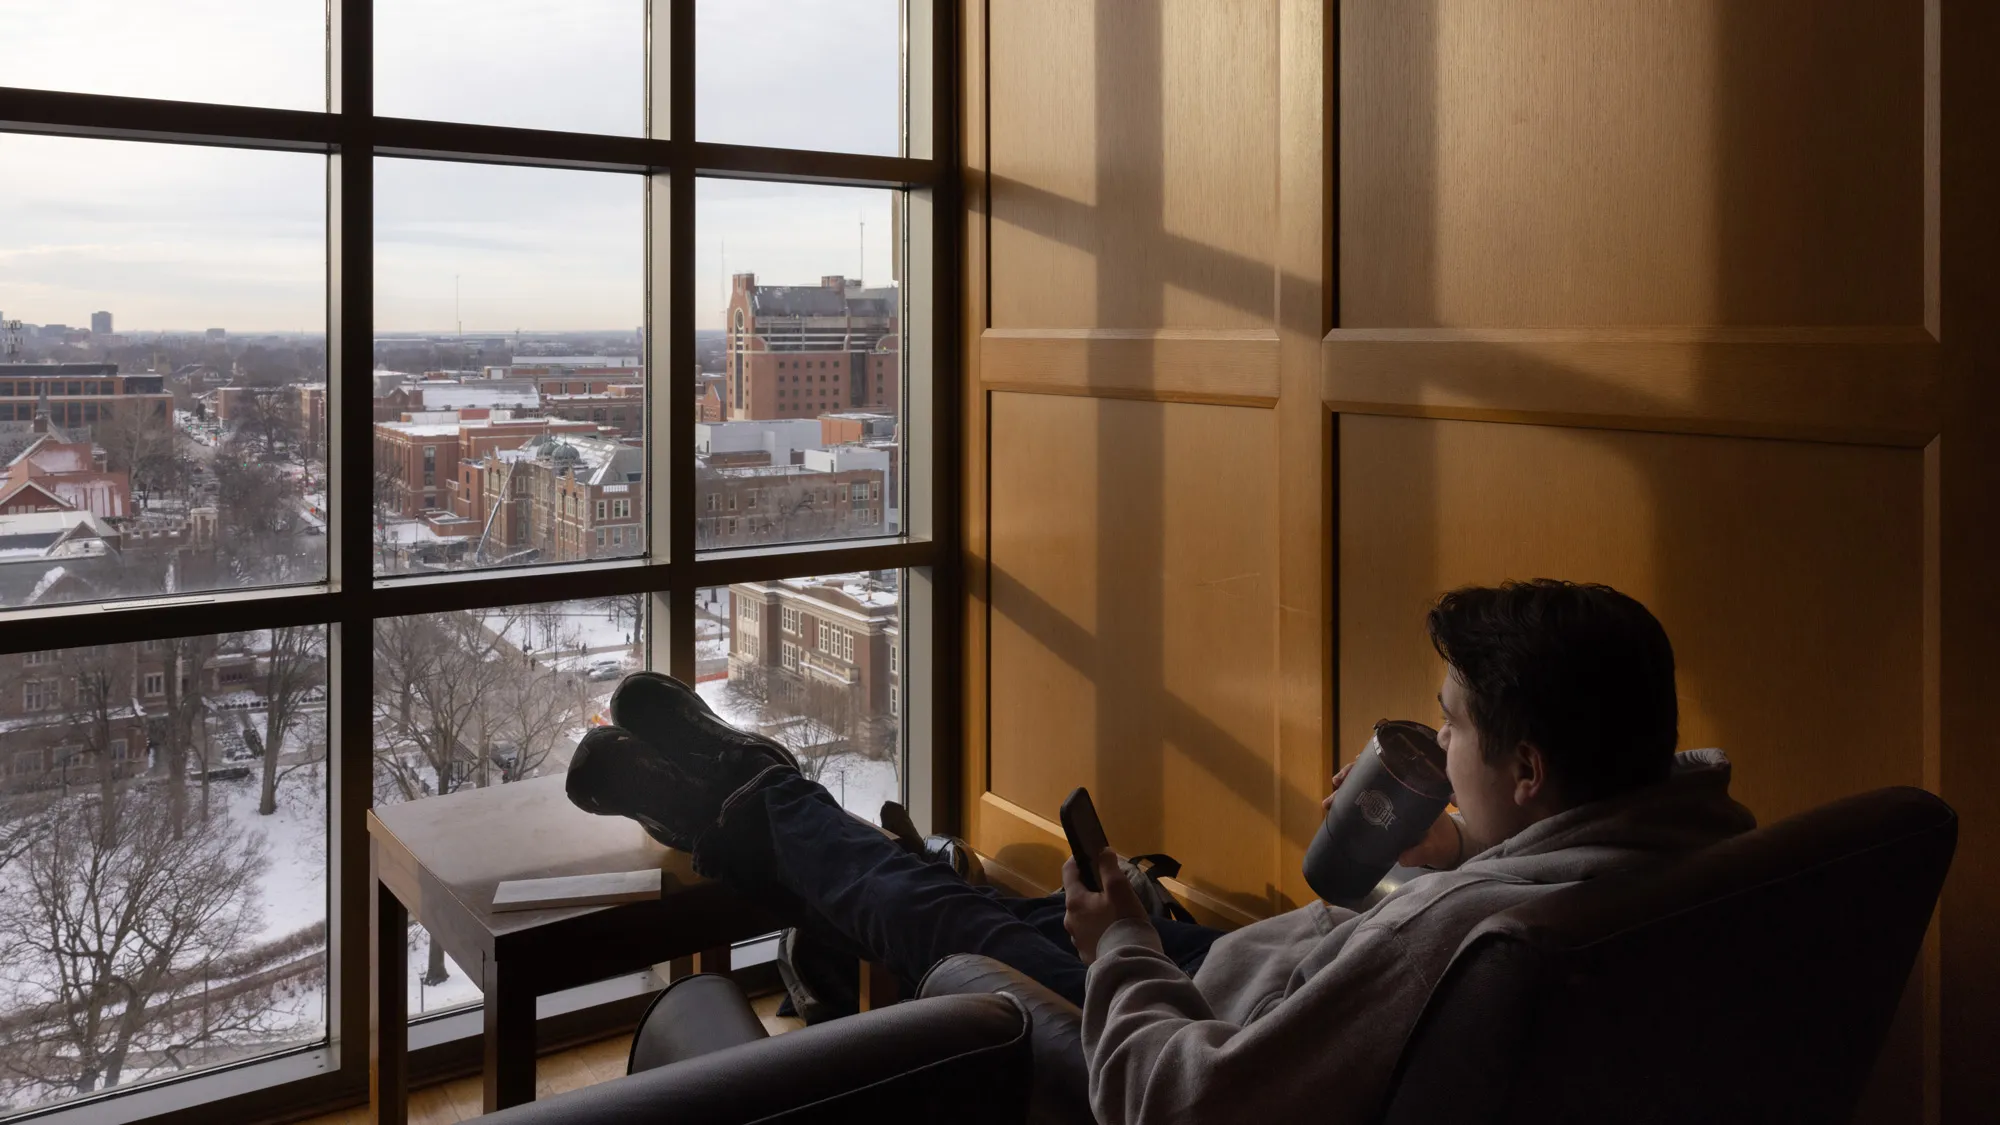 In a cozy scene, a young man kicks back in an arm chair, his legs propped on a coffee table, while holding his cellphone and sipping from a travel mug. Through the window in front of him, he looks down on several blocks of a snow-covered campus. Red brick buildings stand out and morning light creates a modular shadow pattern on the wooden wall beside him.